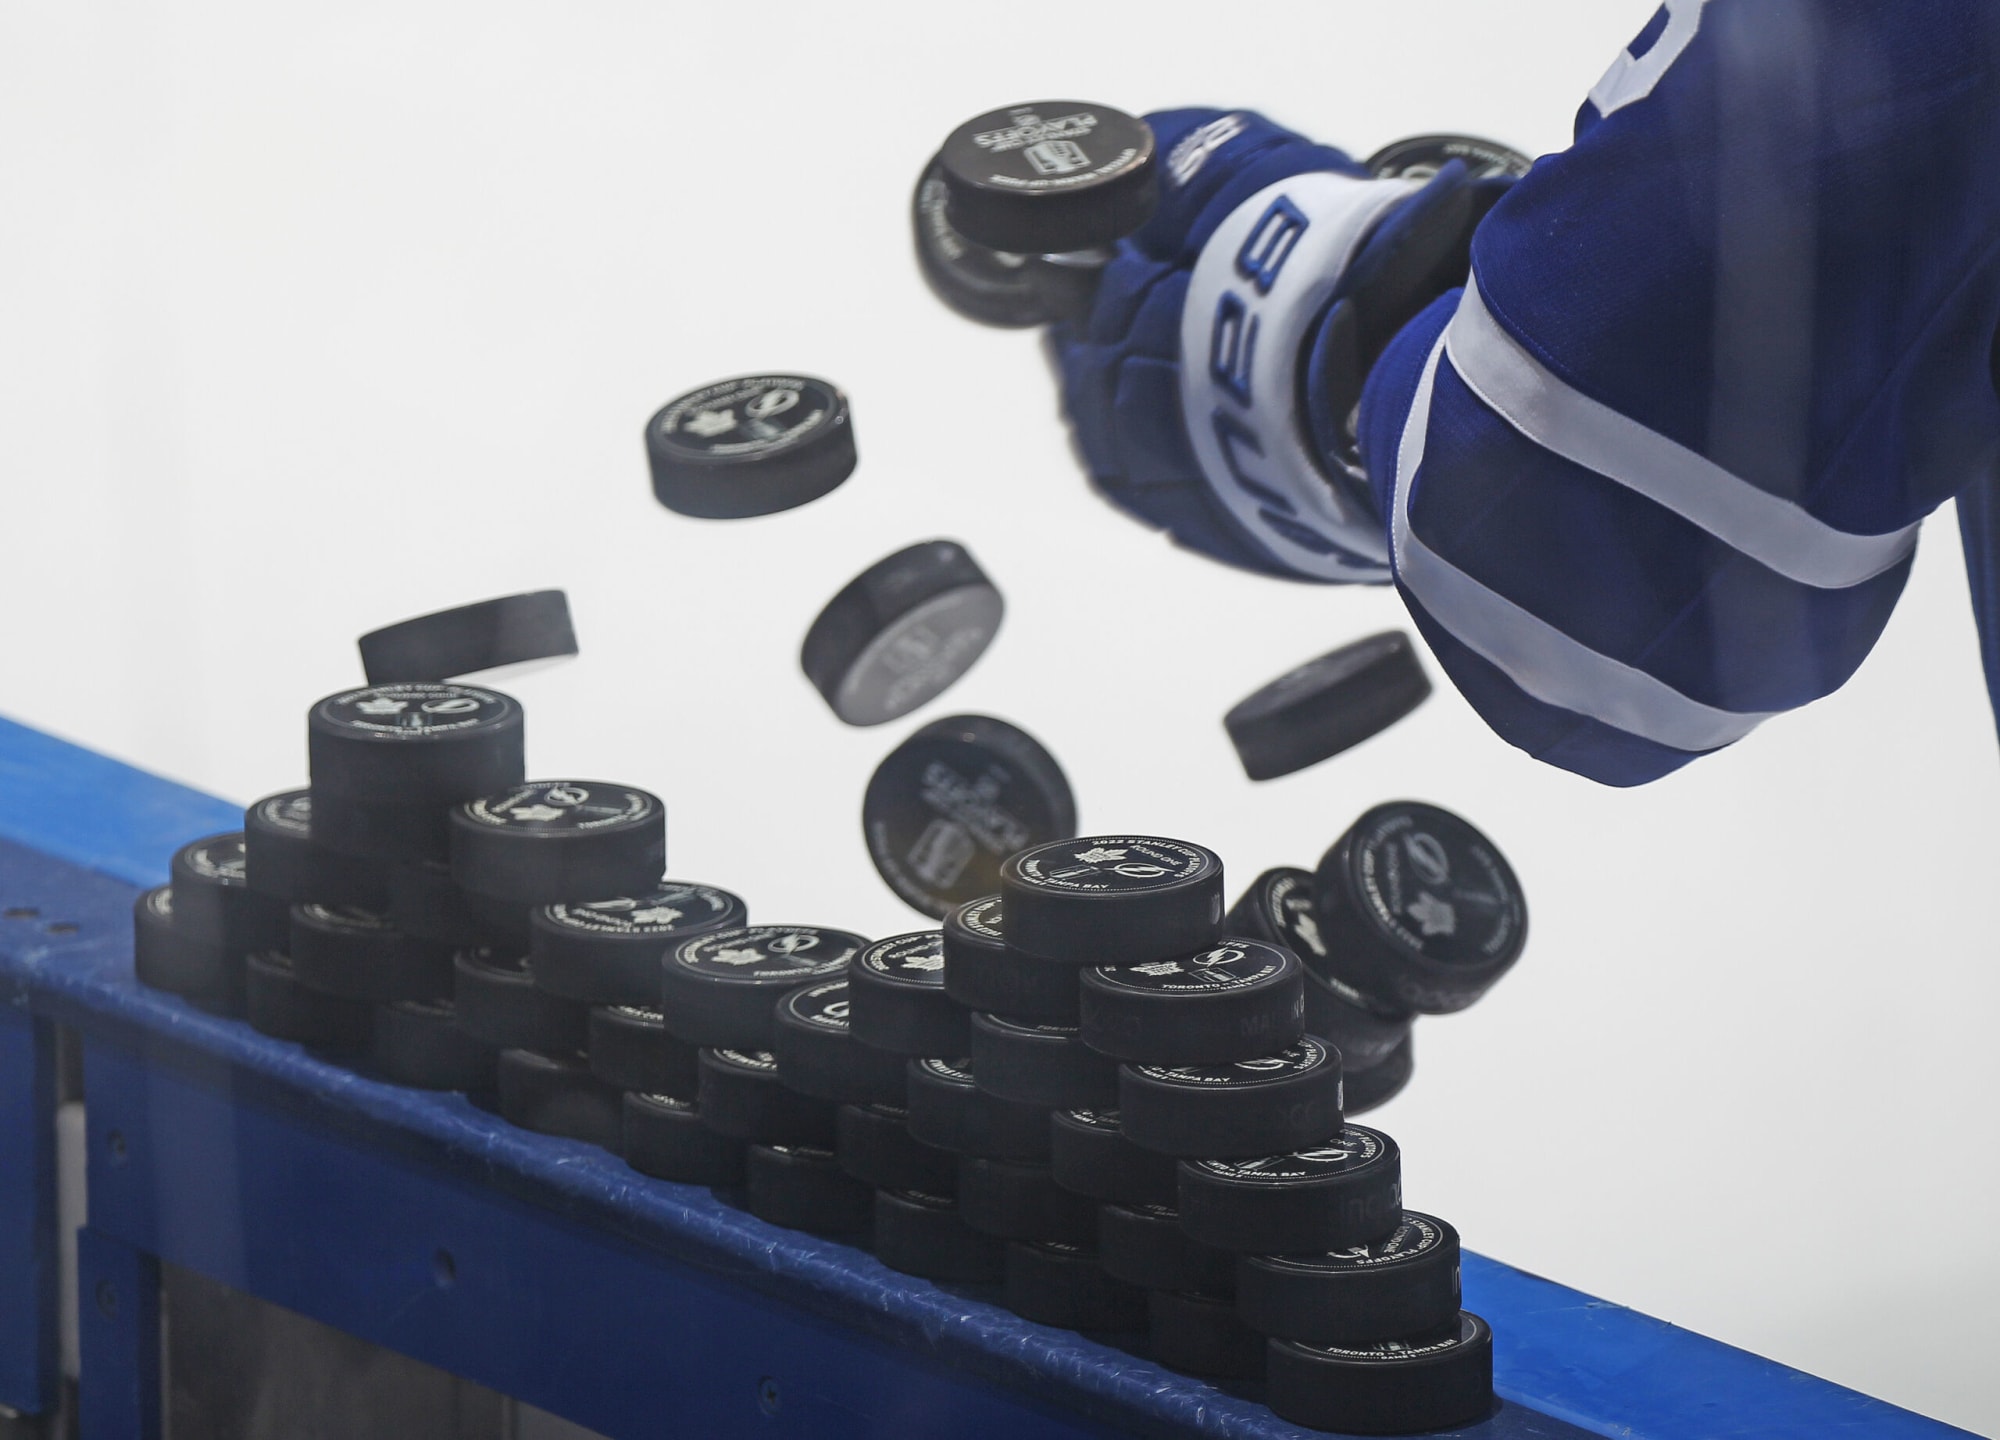 Our Bolts Pride Night will be on - Tampa Bay Lightning